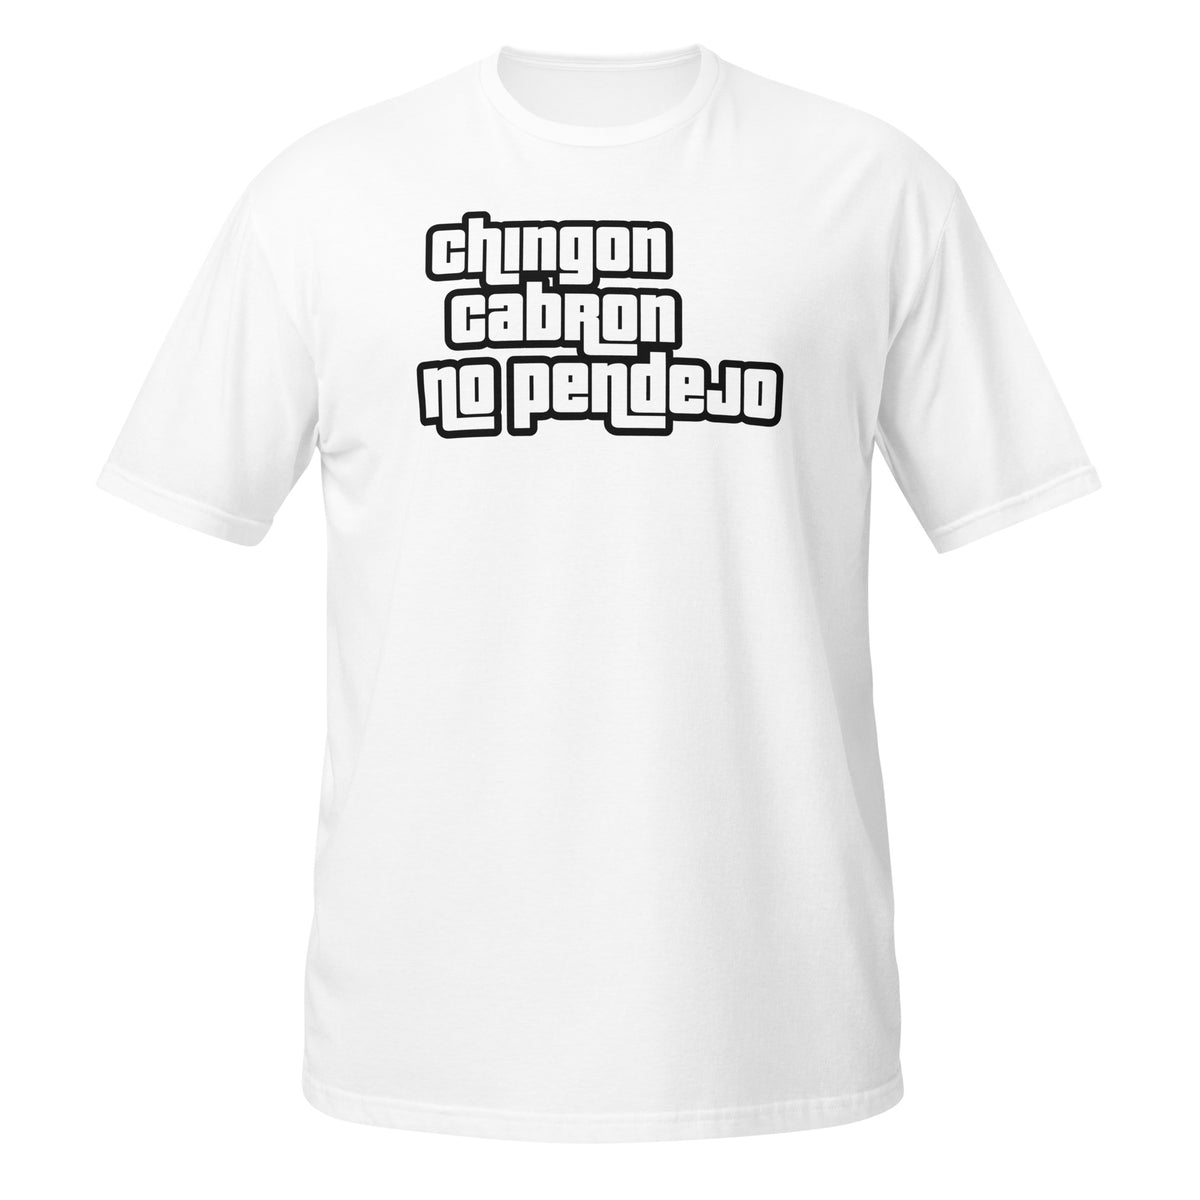 Chingon, Cabron, No Pendejo T-Shirt (Bad Ass but not an asshole)